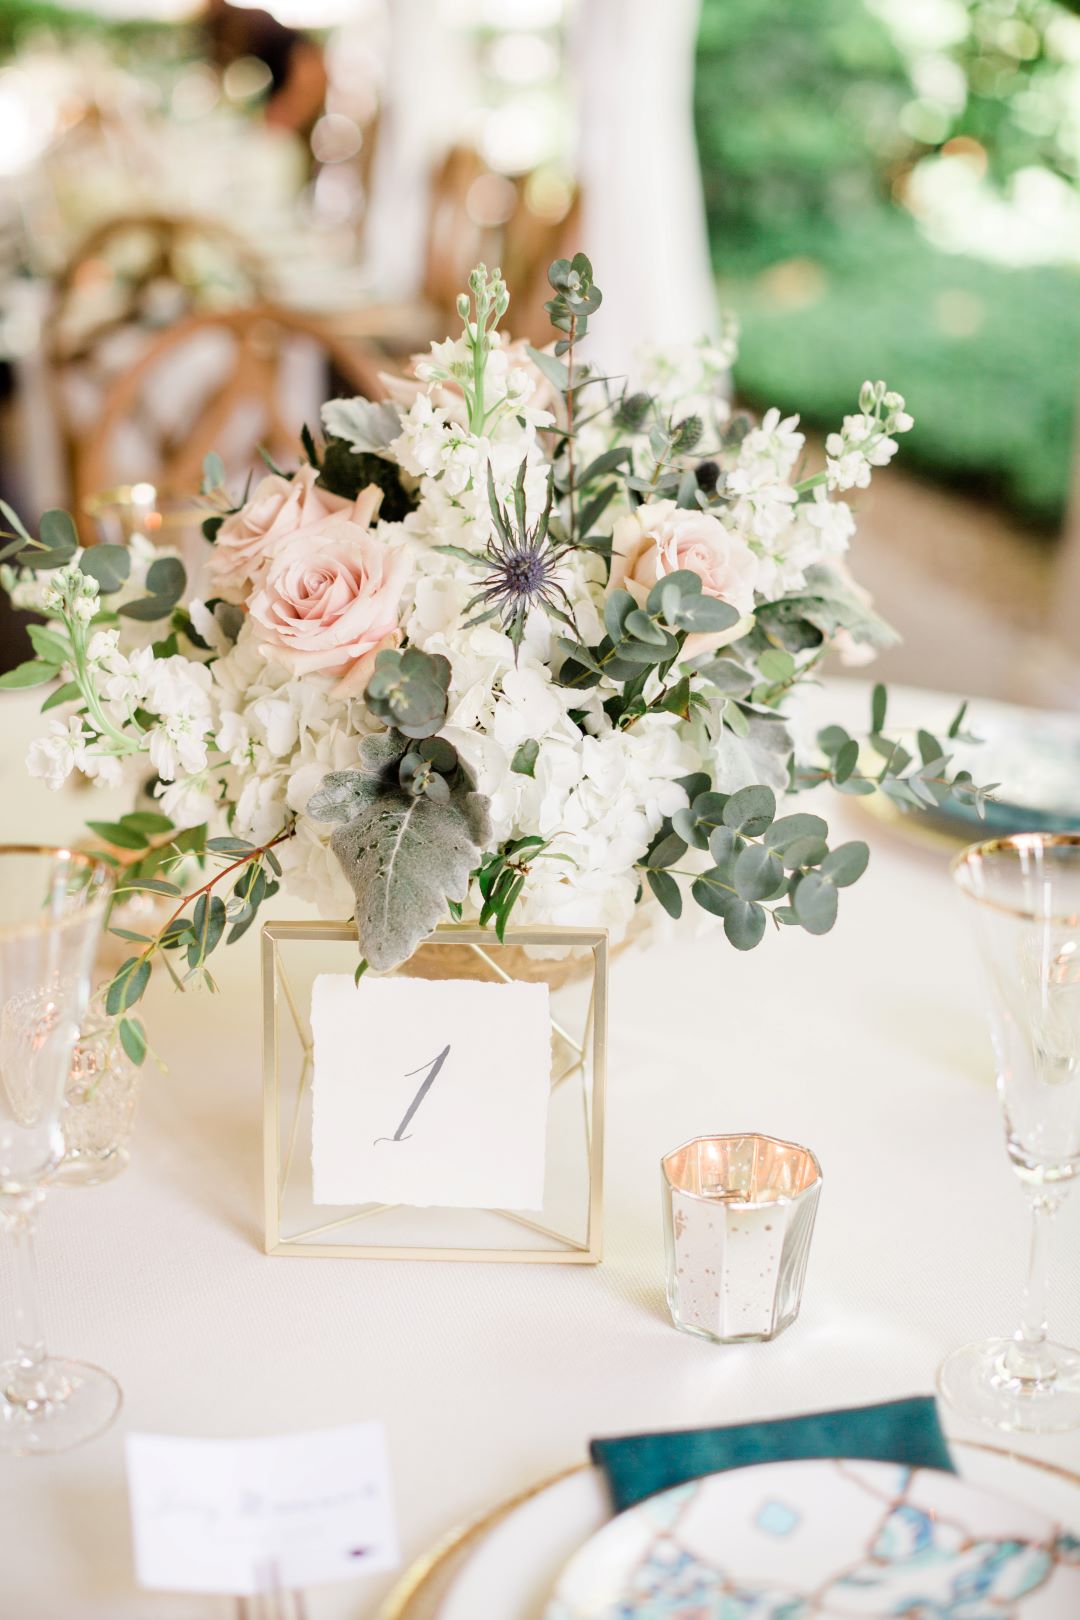 CJ's Off The Square | Blush and white floral centerpieces with tealight candles and gold accents